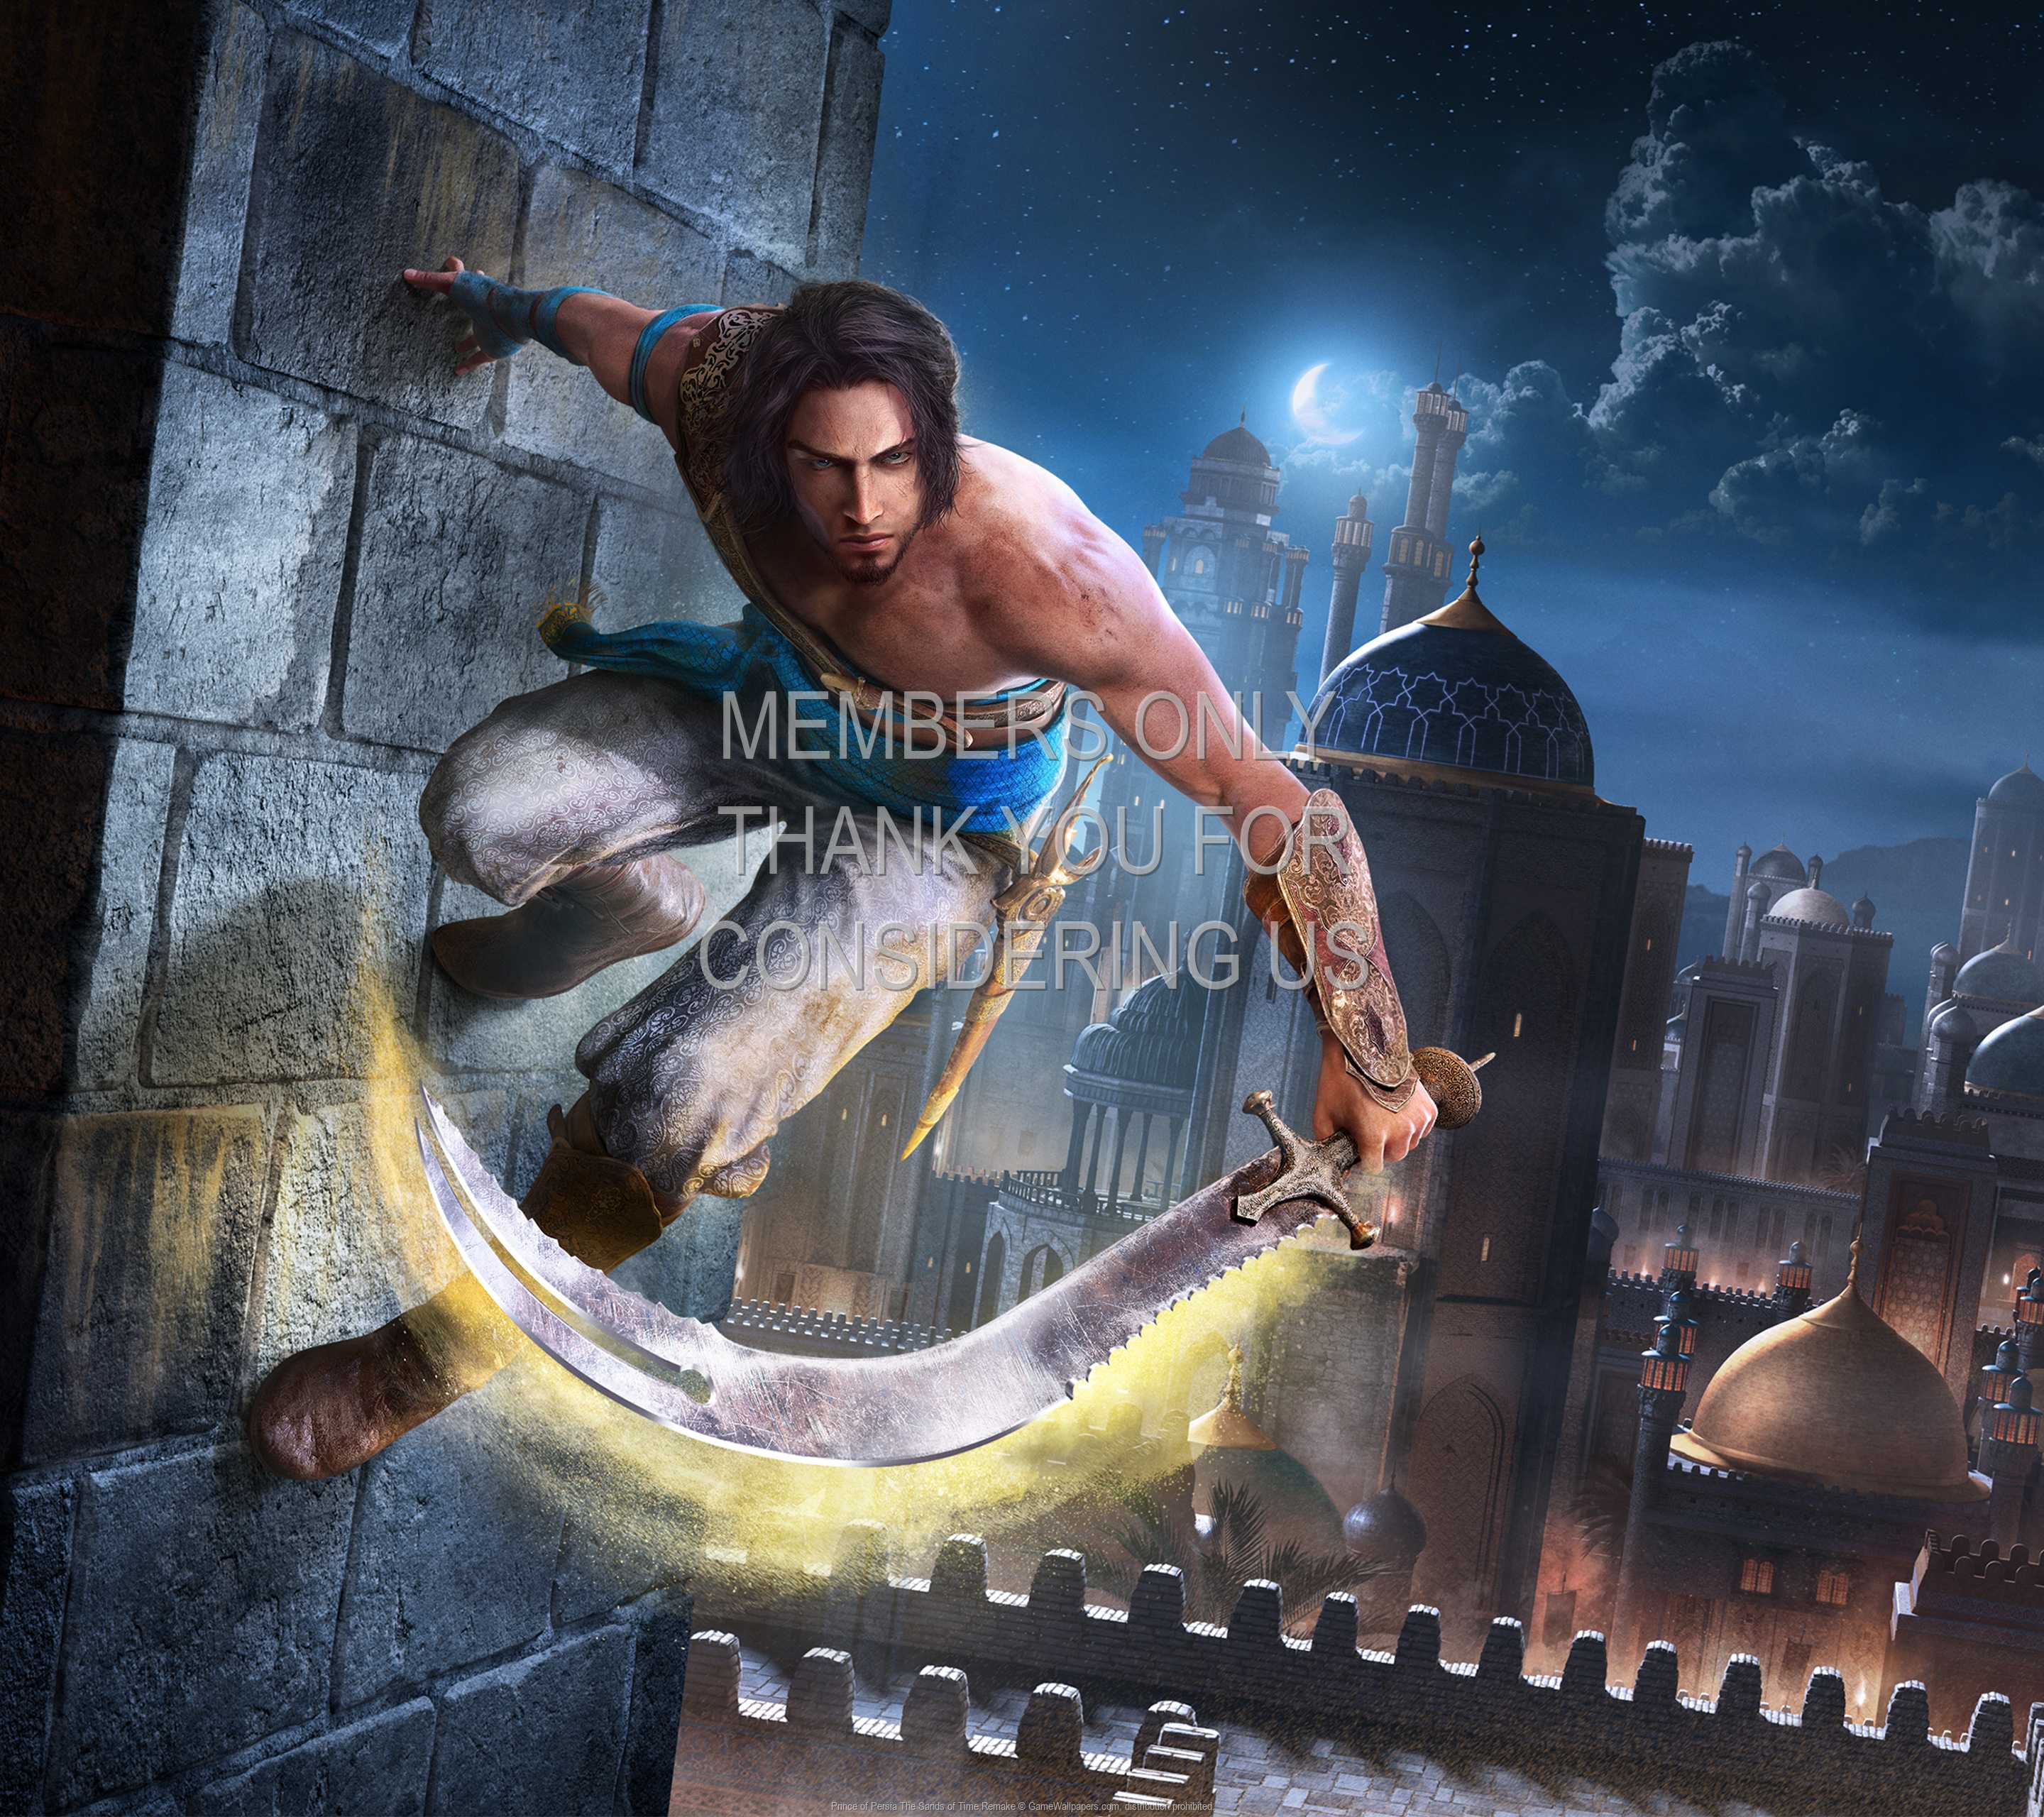 Prince of Persia: The Sands of Time Remake 1440p Horizontal Mobile wallpaper or background 01